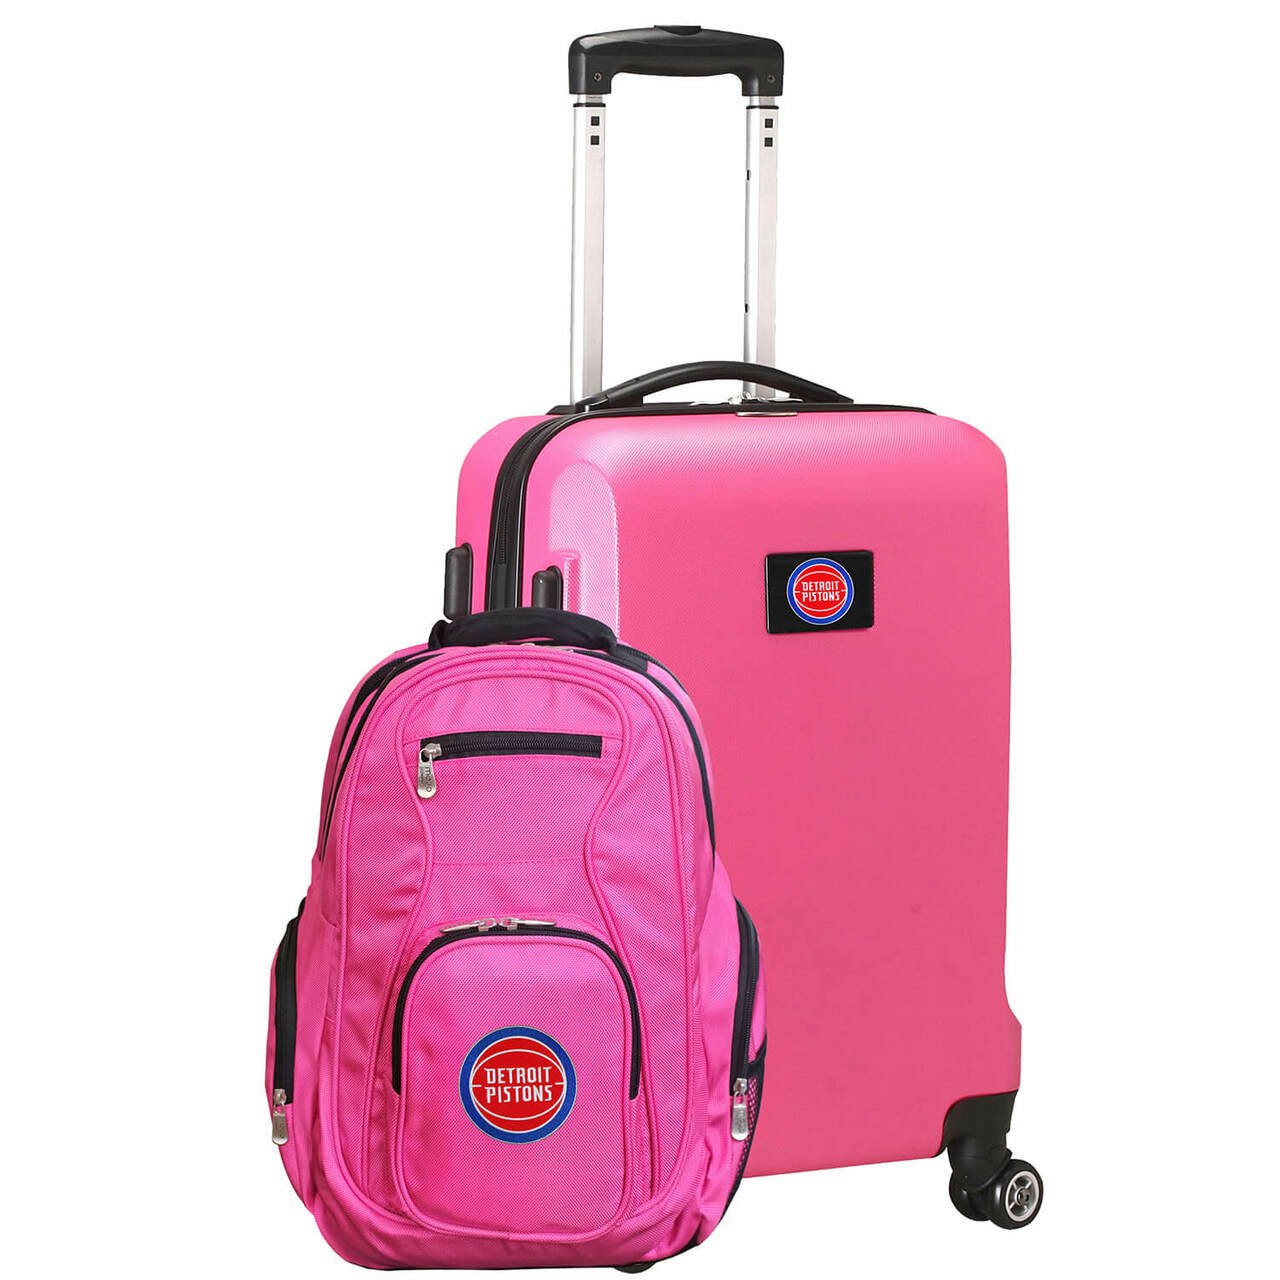 Detroit Pistons Deluxe 2-Piece Backpack and Carry on Set in Pink